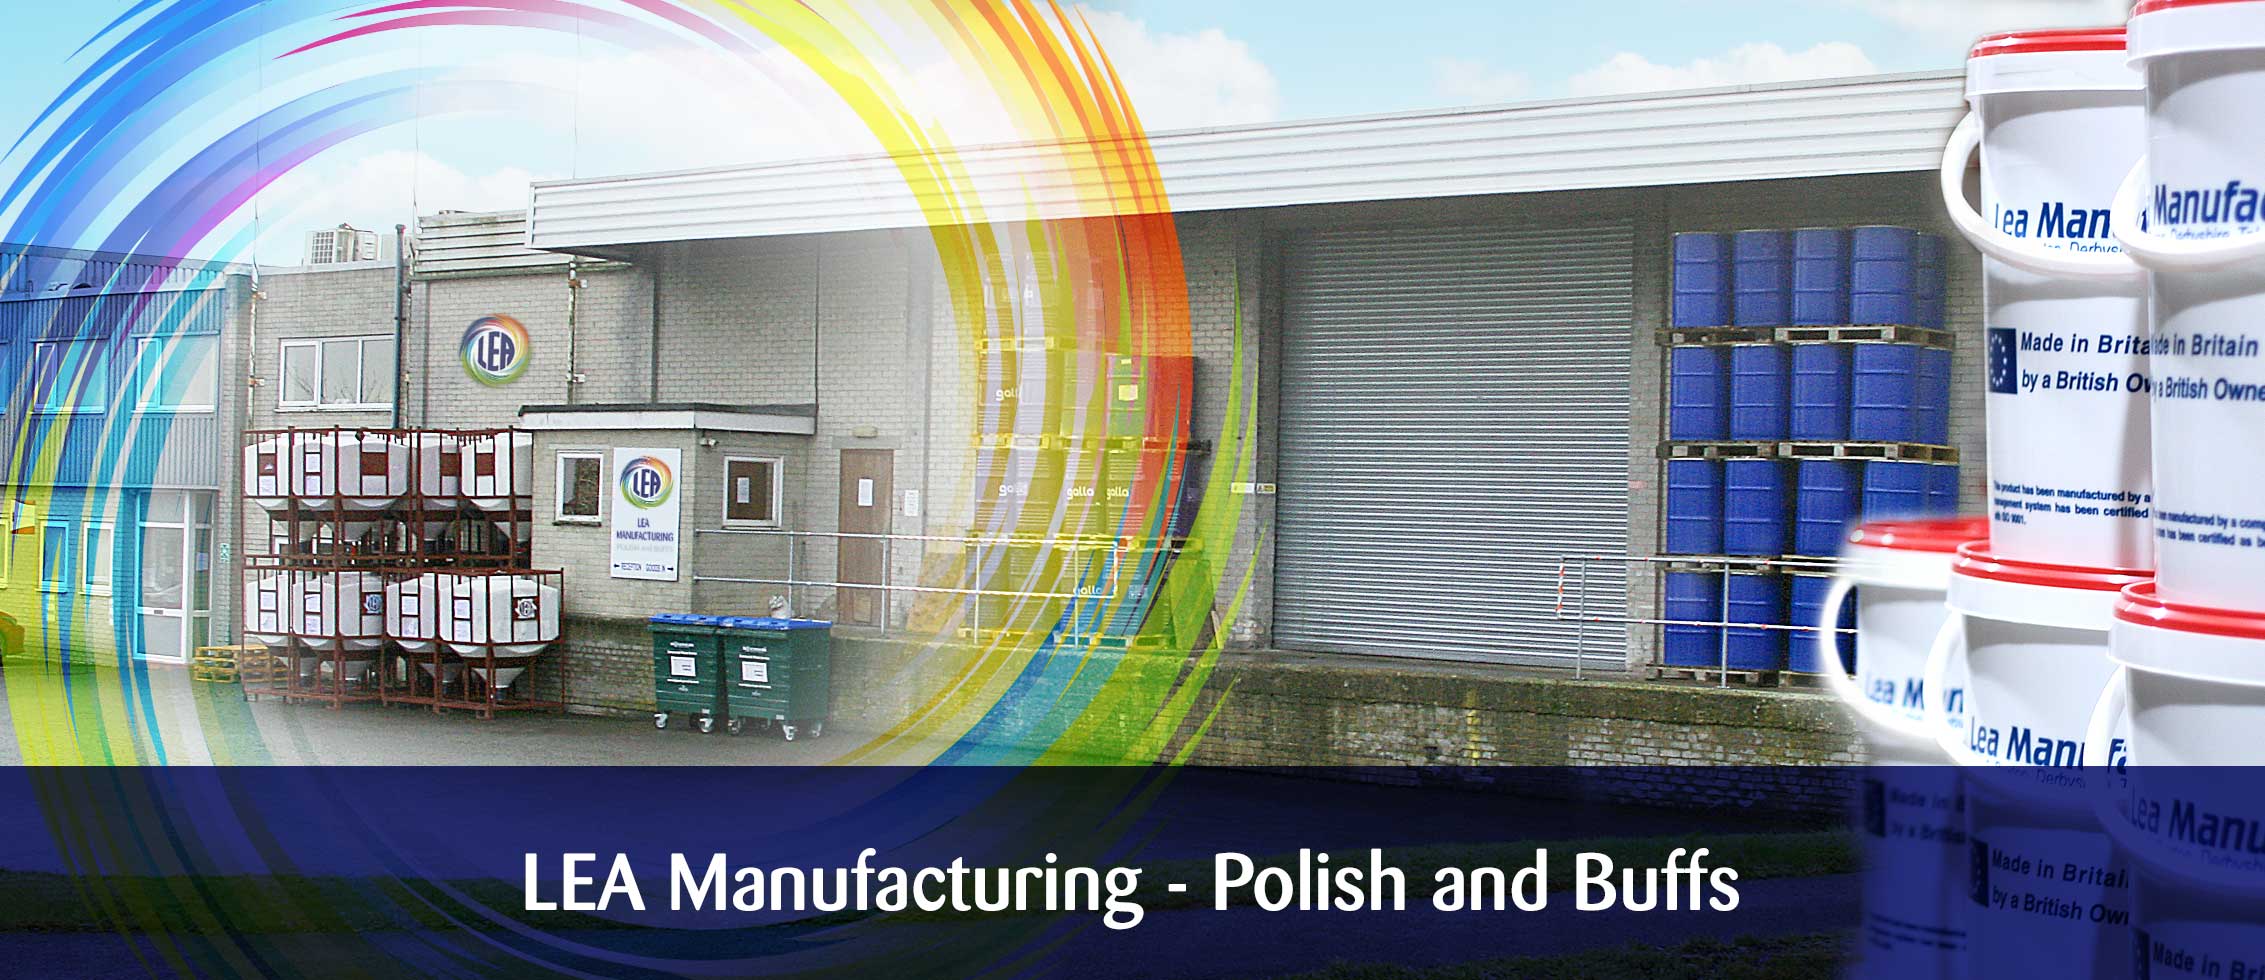 LEA Manufacturing - Polish and Buffs - Sitemap